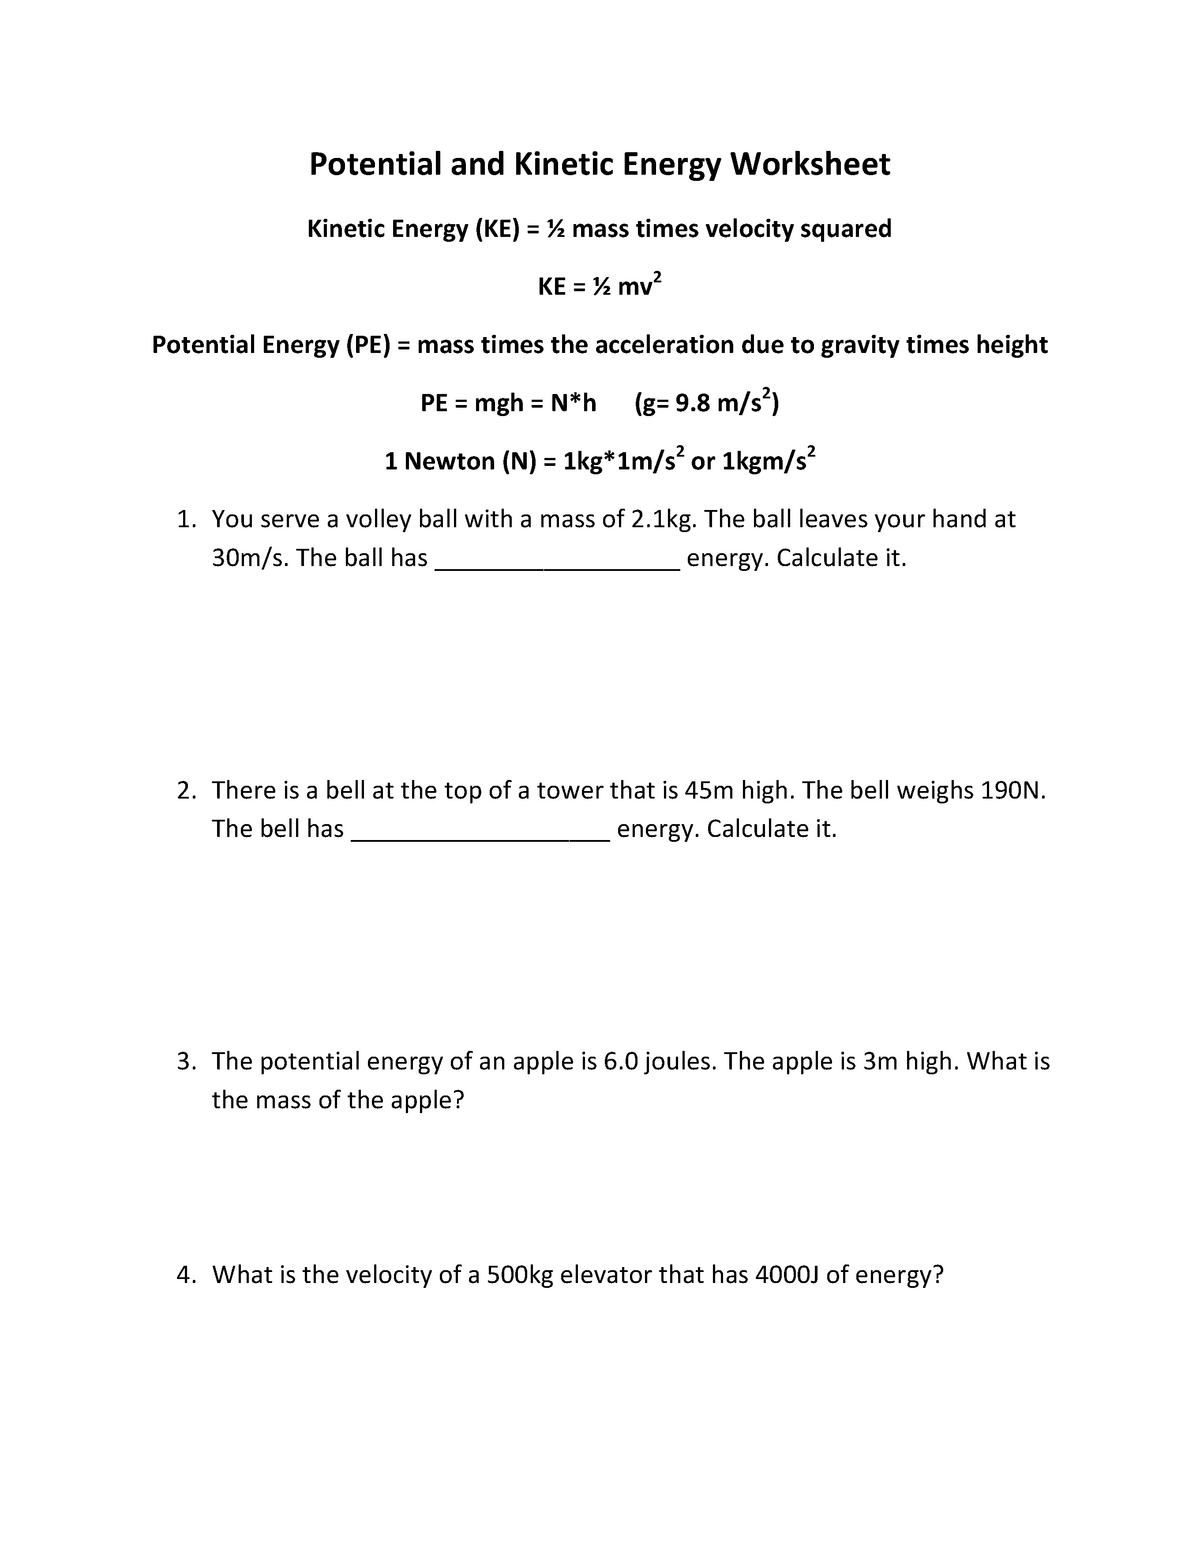 Potential and Kinetic Energy Worksheet - science - 23 - UAEU Inside Potential And Kinetic Energy Worksheet